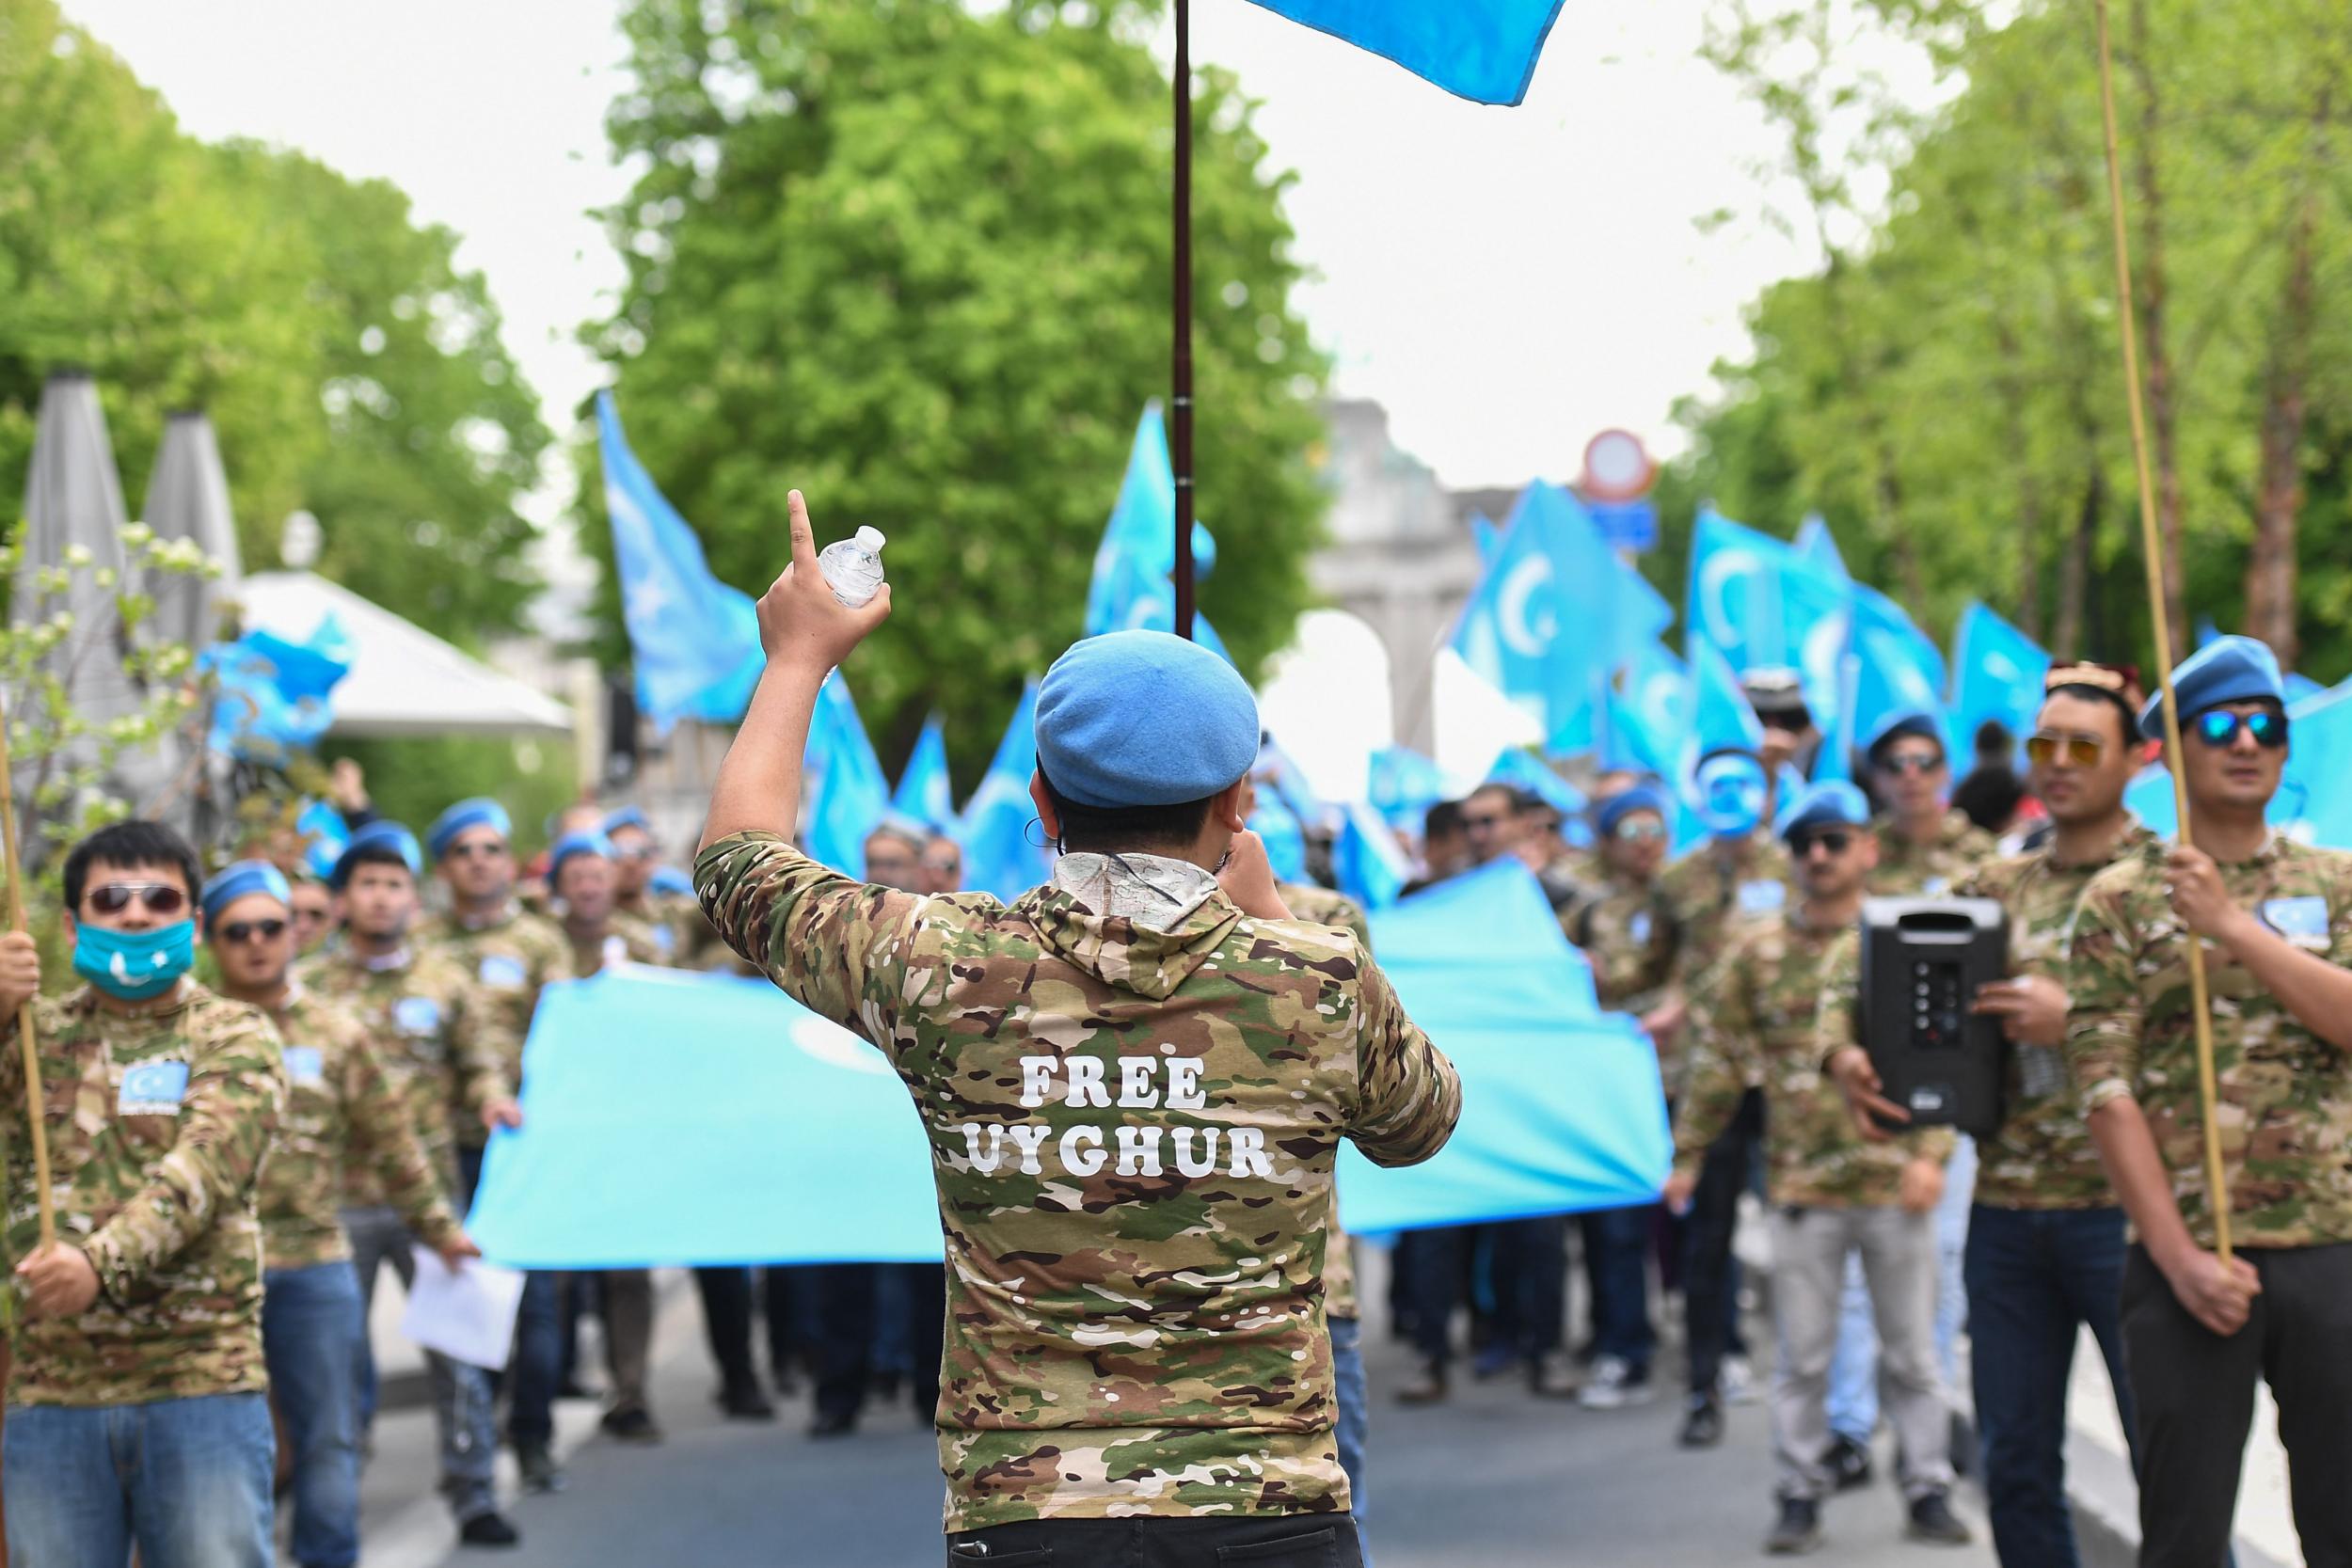 Ethnic Uighurs take part in a march in Brussels calling for the EU to demand China respect human rights and close the re-education centres